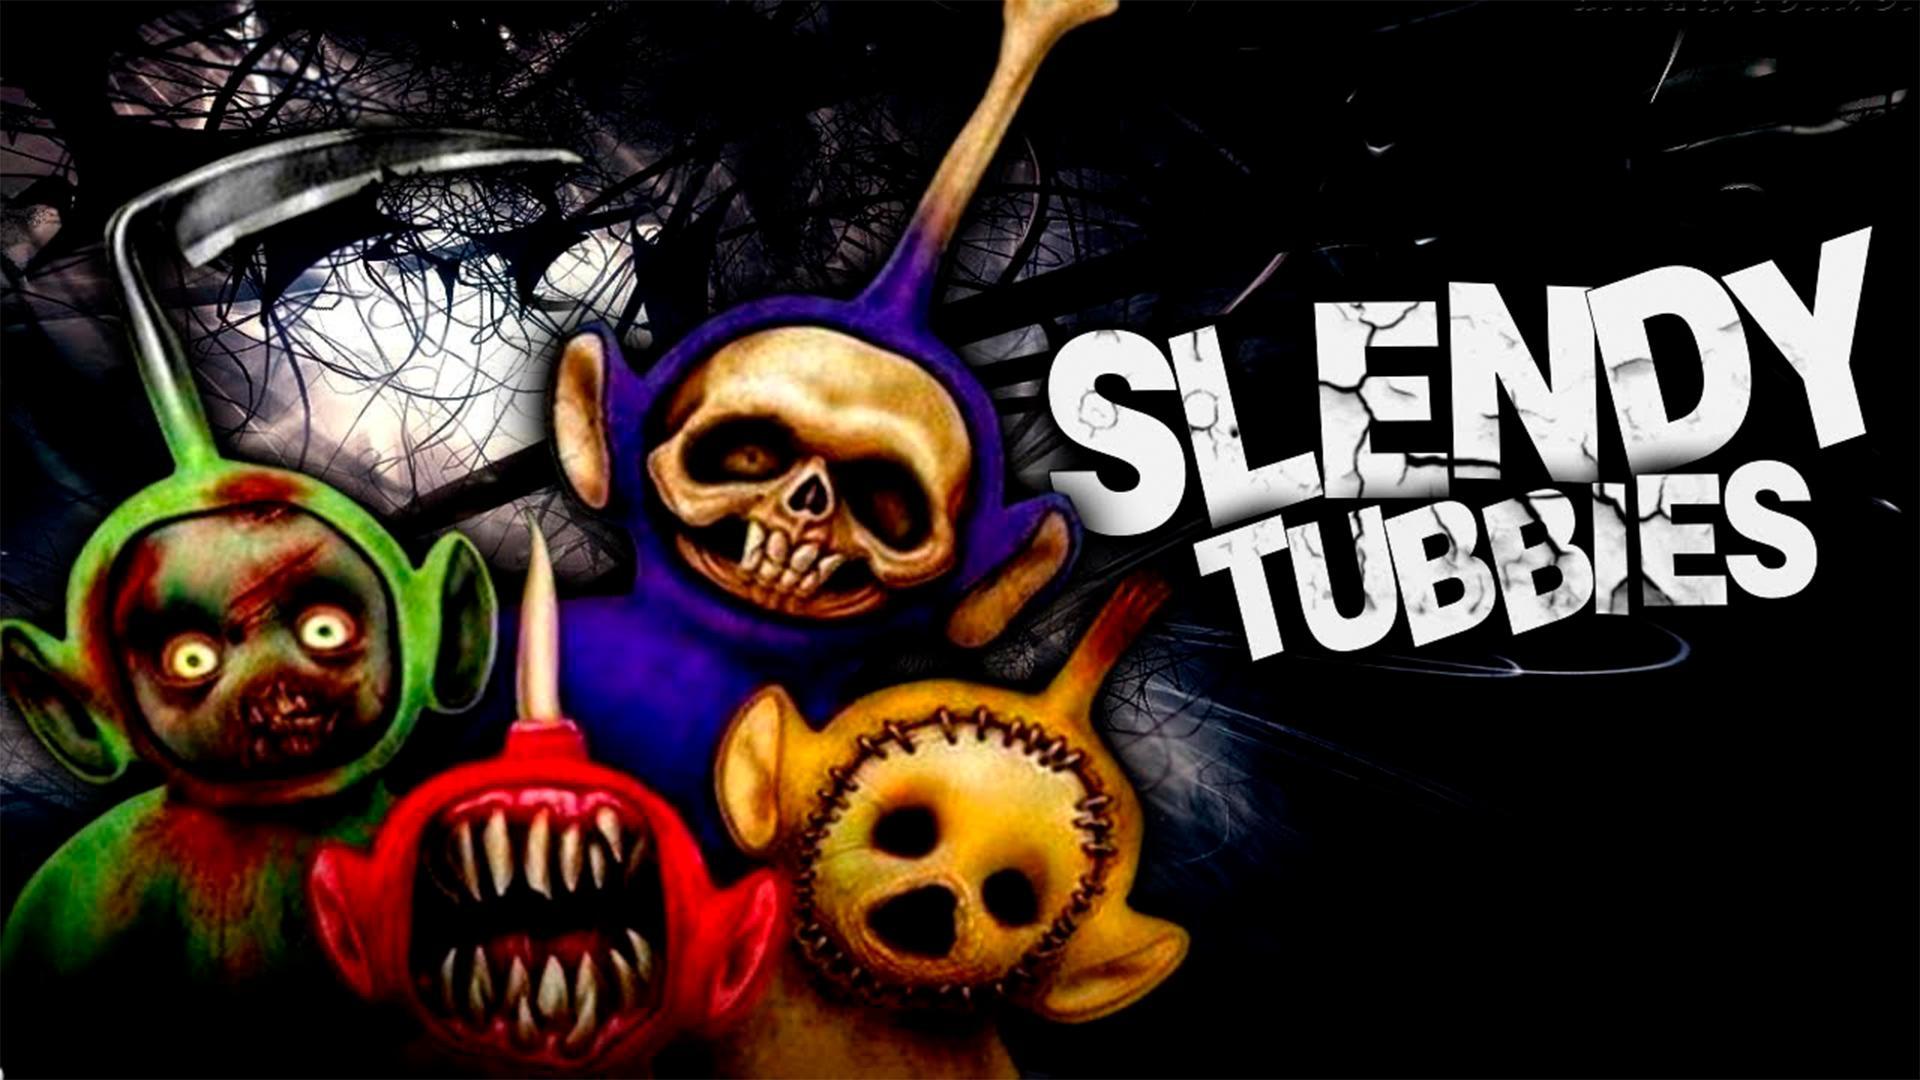 Slendytubbies lll Game Horror Skins for Android